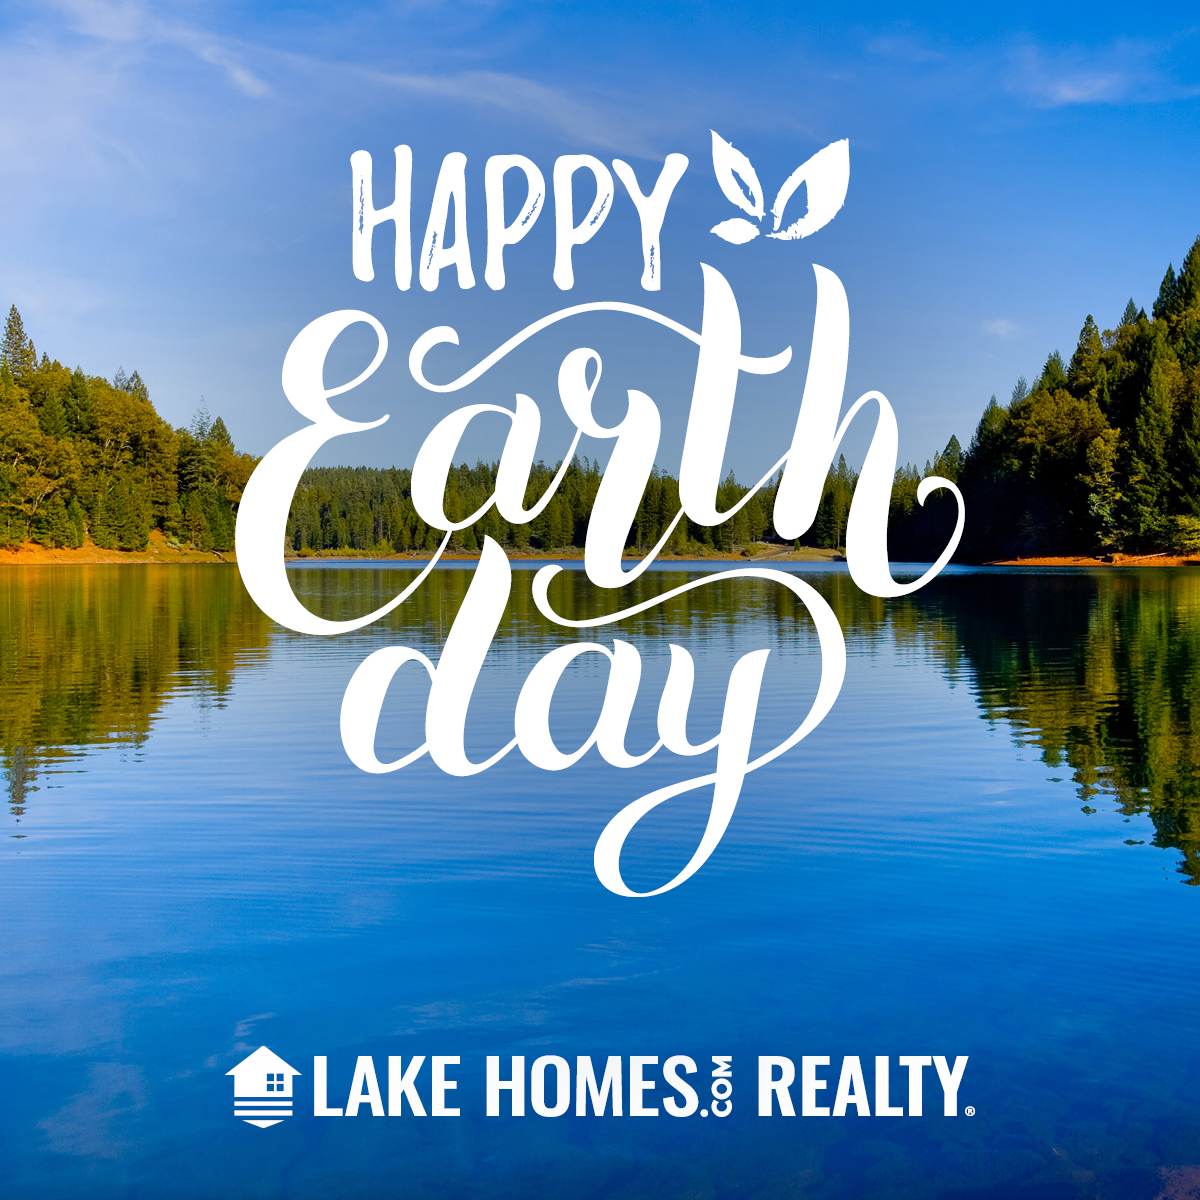 From mountains to lakes, Earth fills our lives with wonder. Let's cherish every part.

#LakeHomesRealty #LakeLife #LakeLifestyle #LakeLiving #LakeHouse #LakeVibes #LakeFun #LakeLove #Lakeside #LifeontheLake #Outdoorliving #lakelove #kayak #canoe #onthewater #lifeonthelake